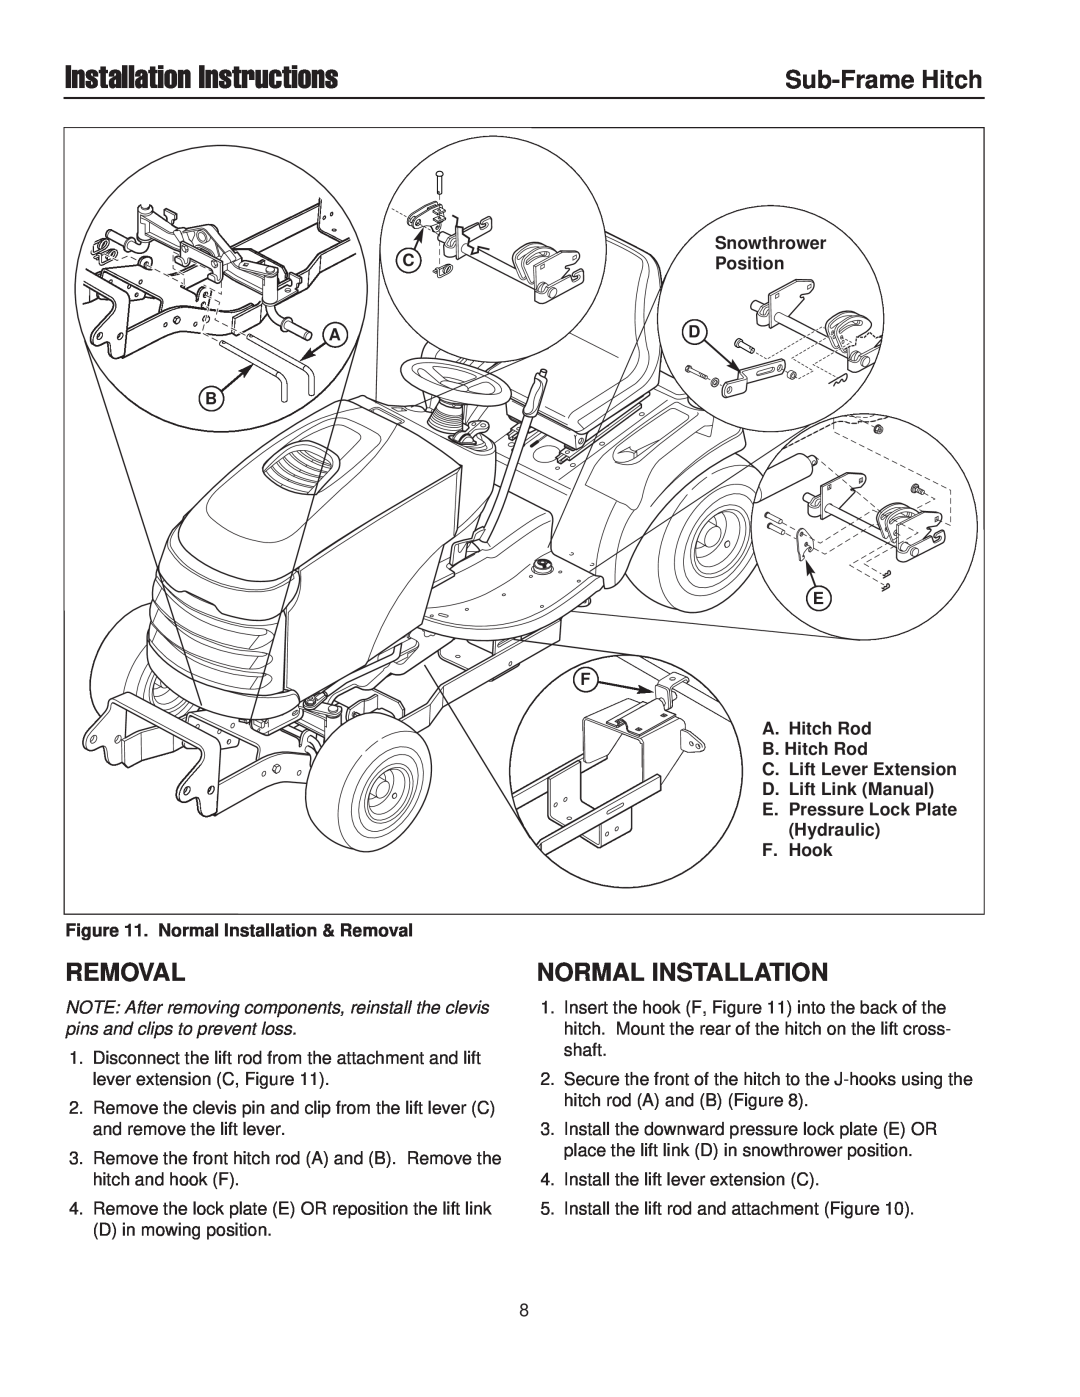 Briggs & Stratton 1800, 2600, 1600, 2800, 1700 Removal, Normal Installation, Installation Instructions, Sub-Frame Hitch 